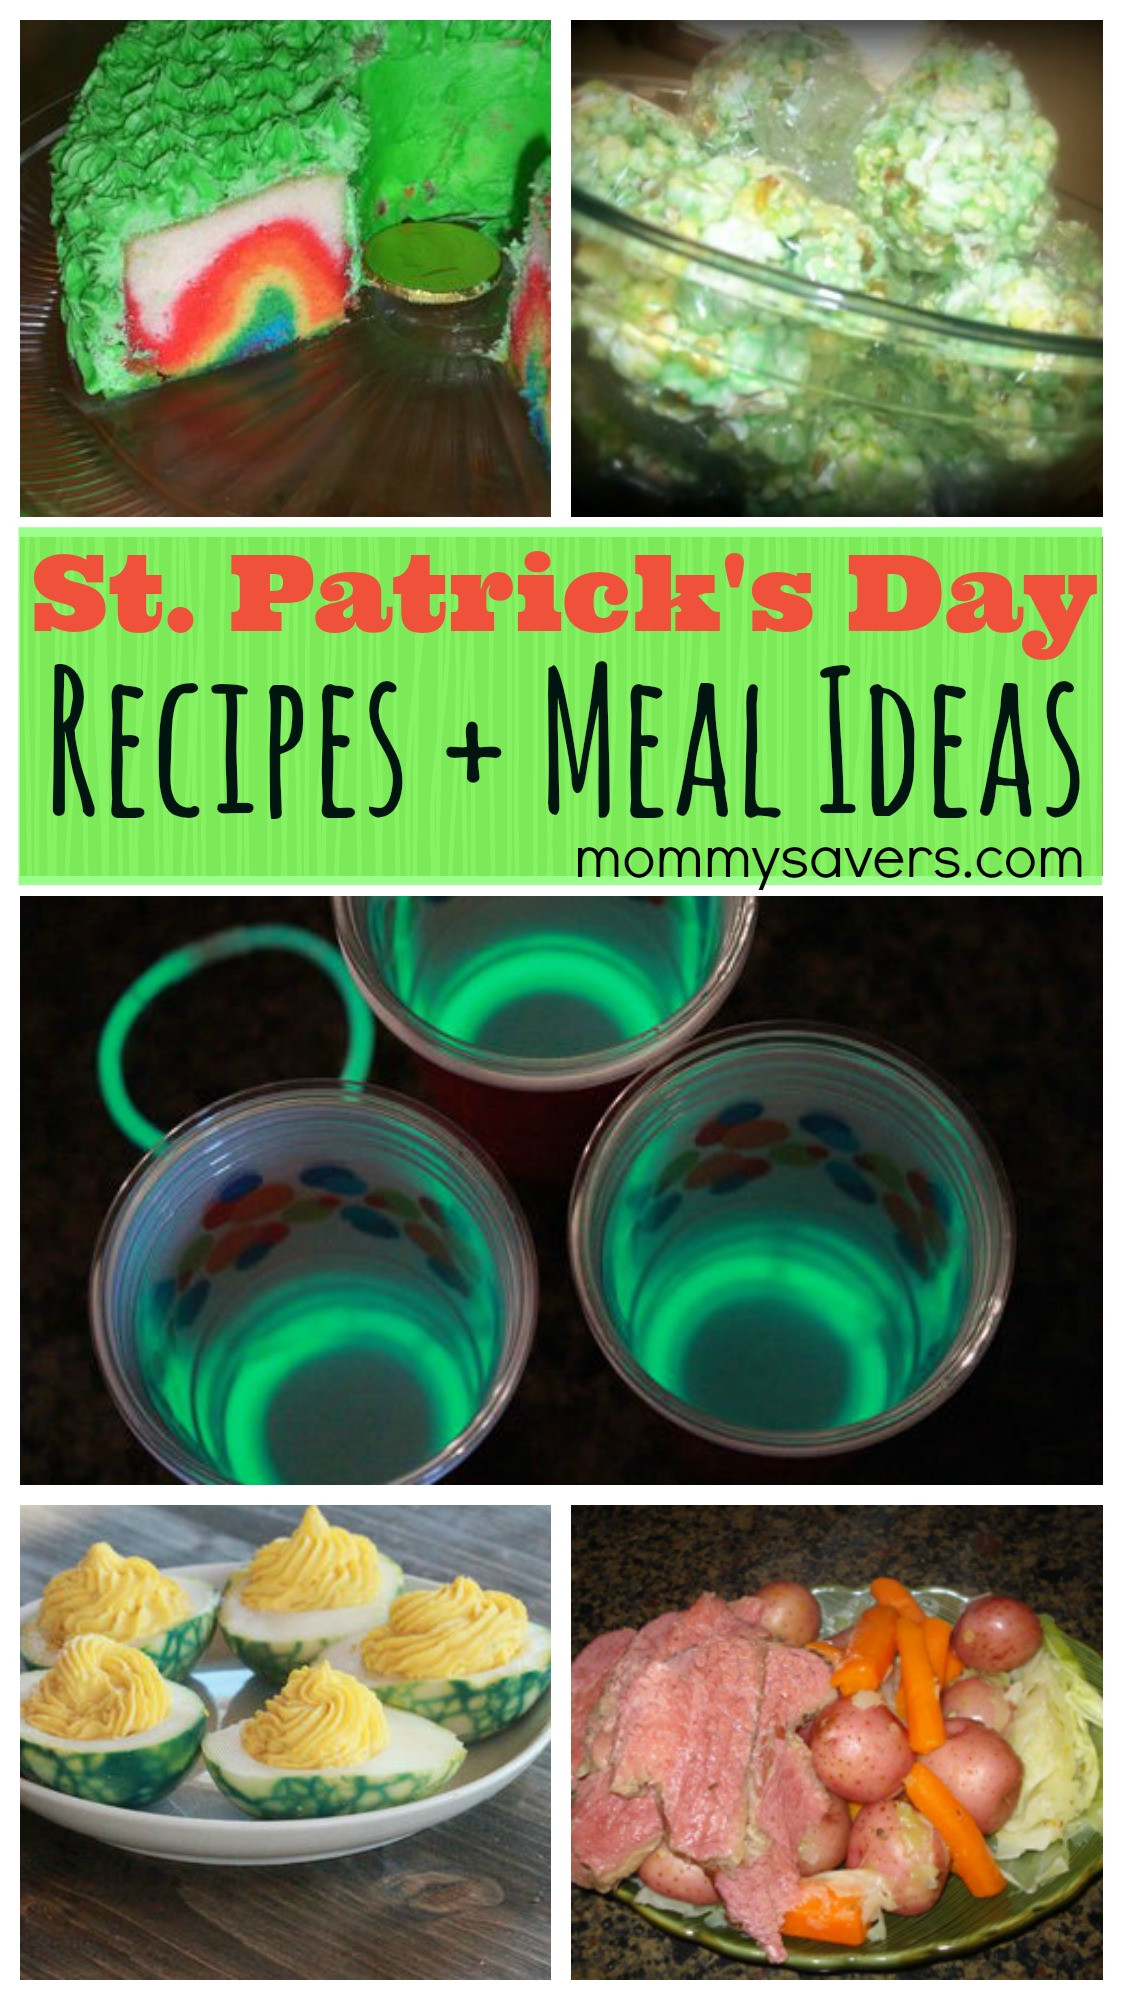 St Patrick's Day Meals Ideas
 St Patrick s Day Recipes and Meal Ideas